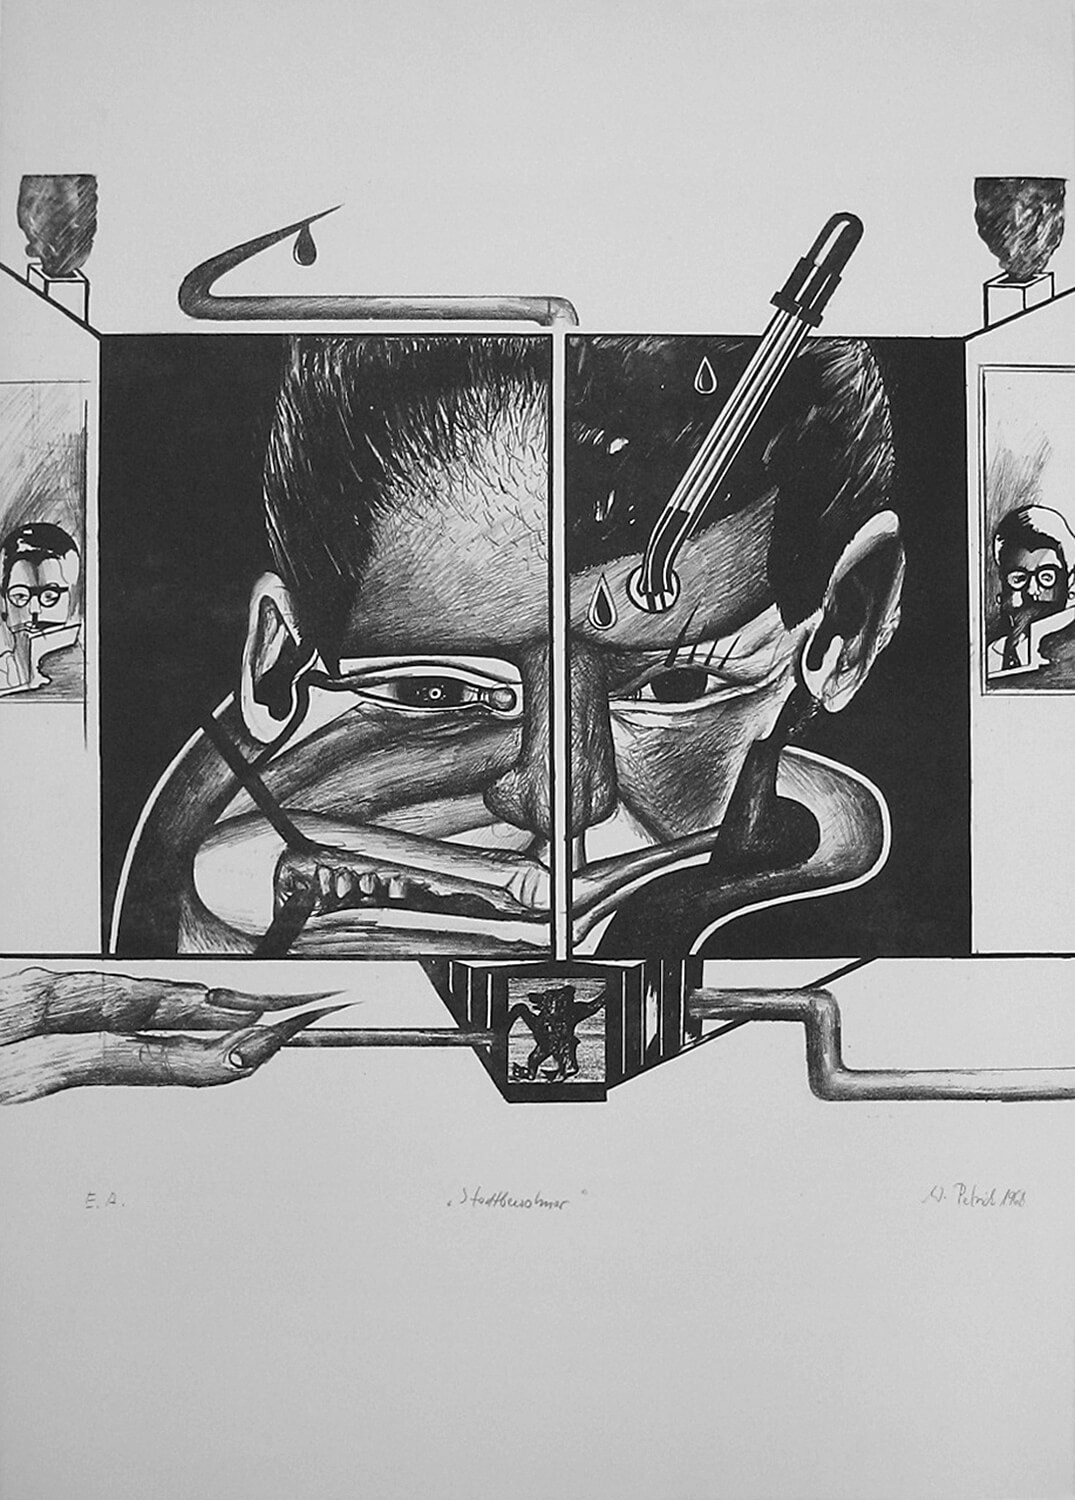 Wolfgang Petrick, Stadtbewohner, 1968, Lithographie, e. a., 77 x 54 cm